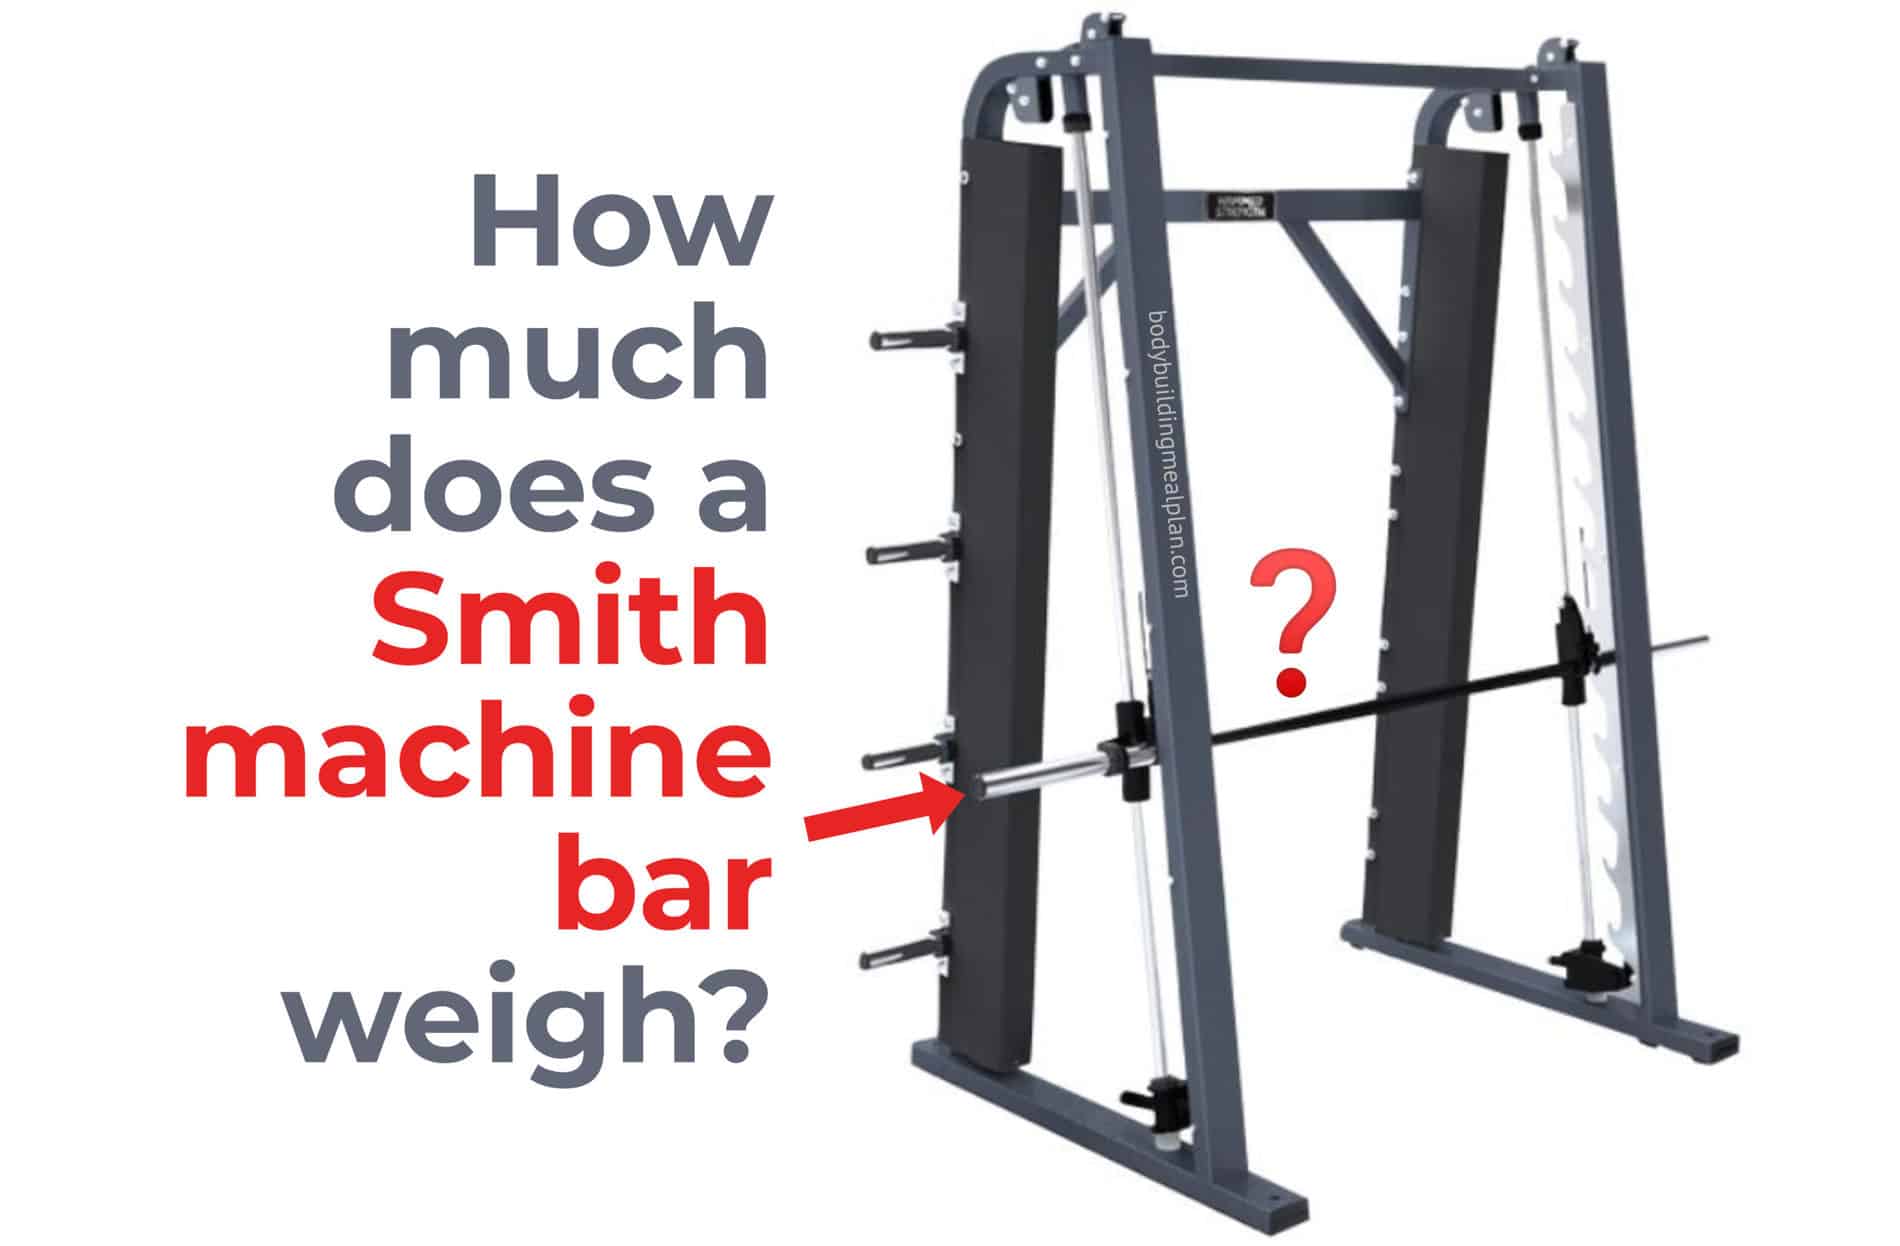 how much does a smith machine bar weigh lbs